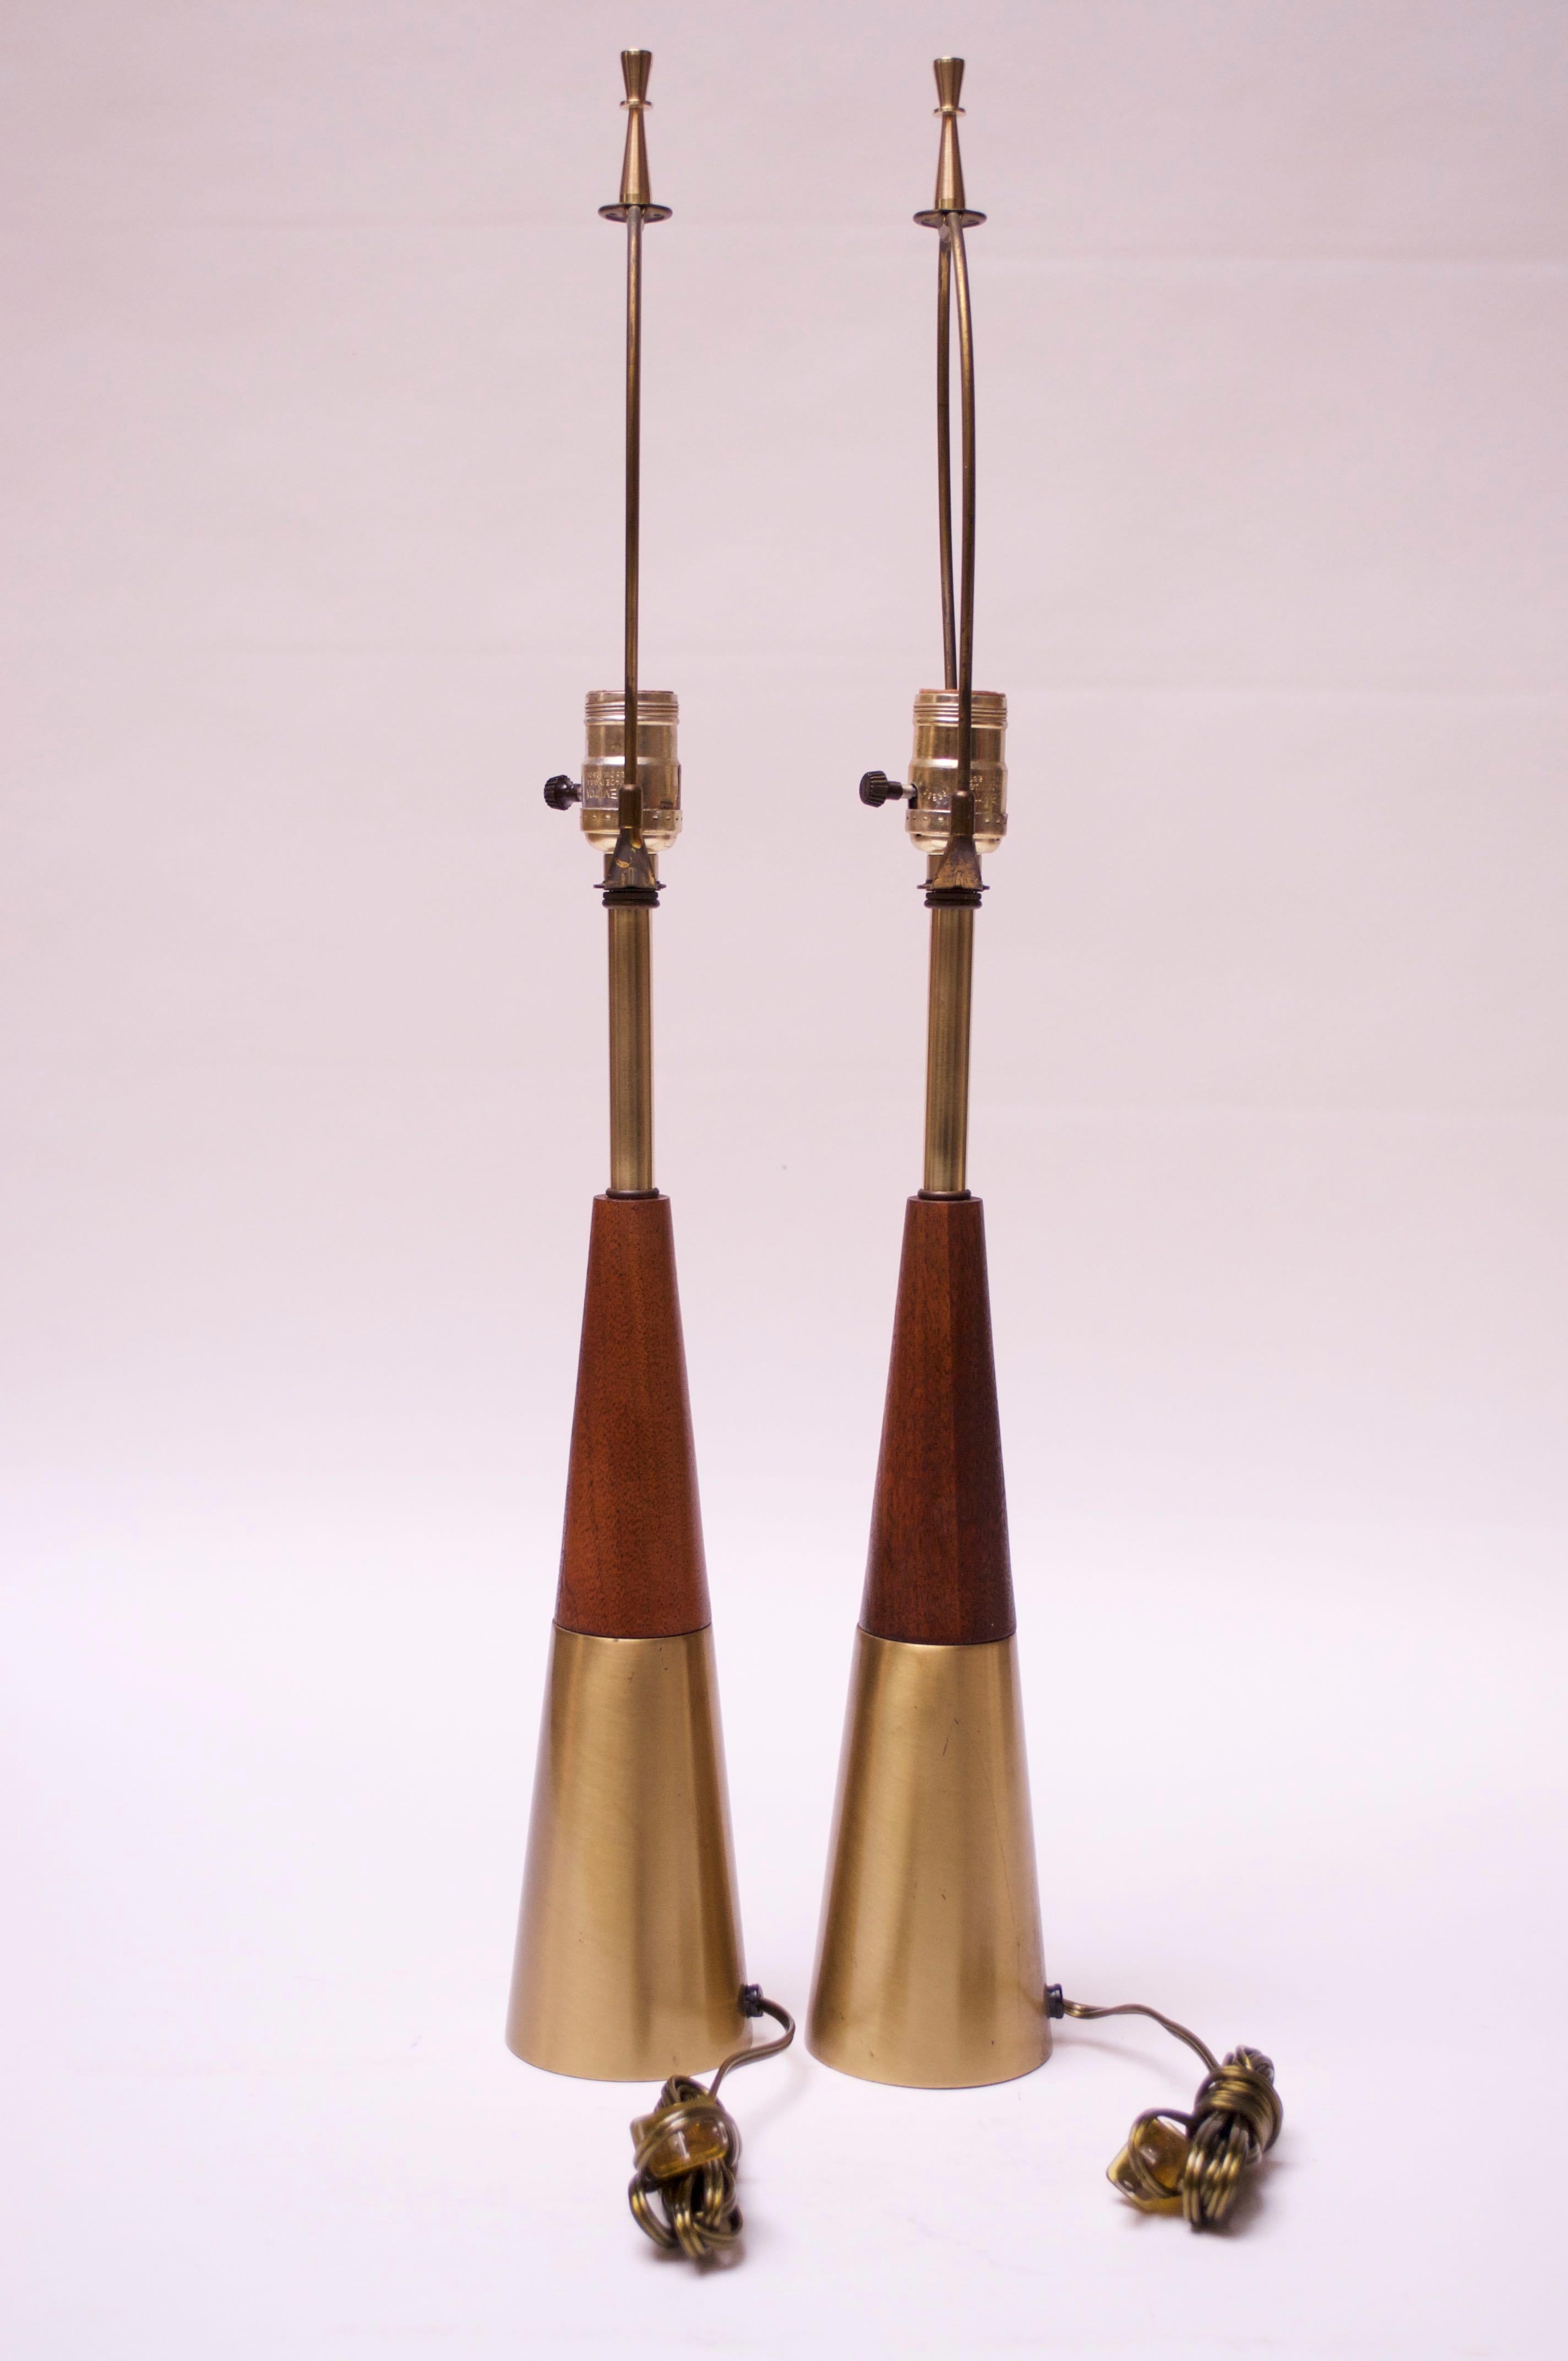 American Pair of Midcentury Brass and Walnut Table Lamps by Tony Paul for Westwood